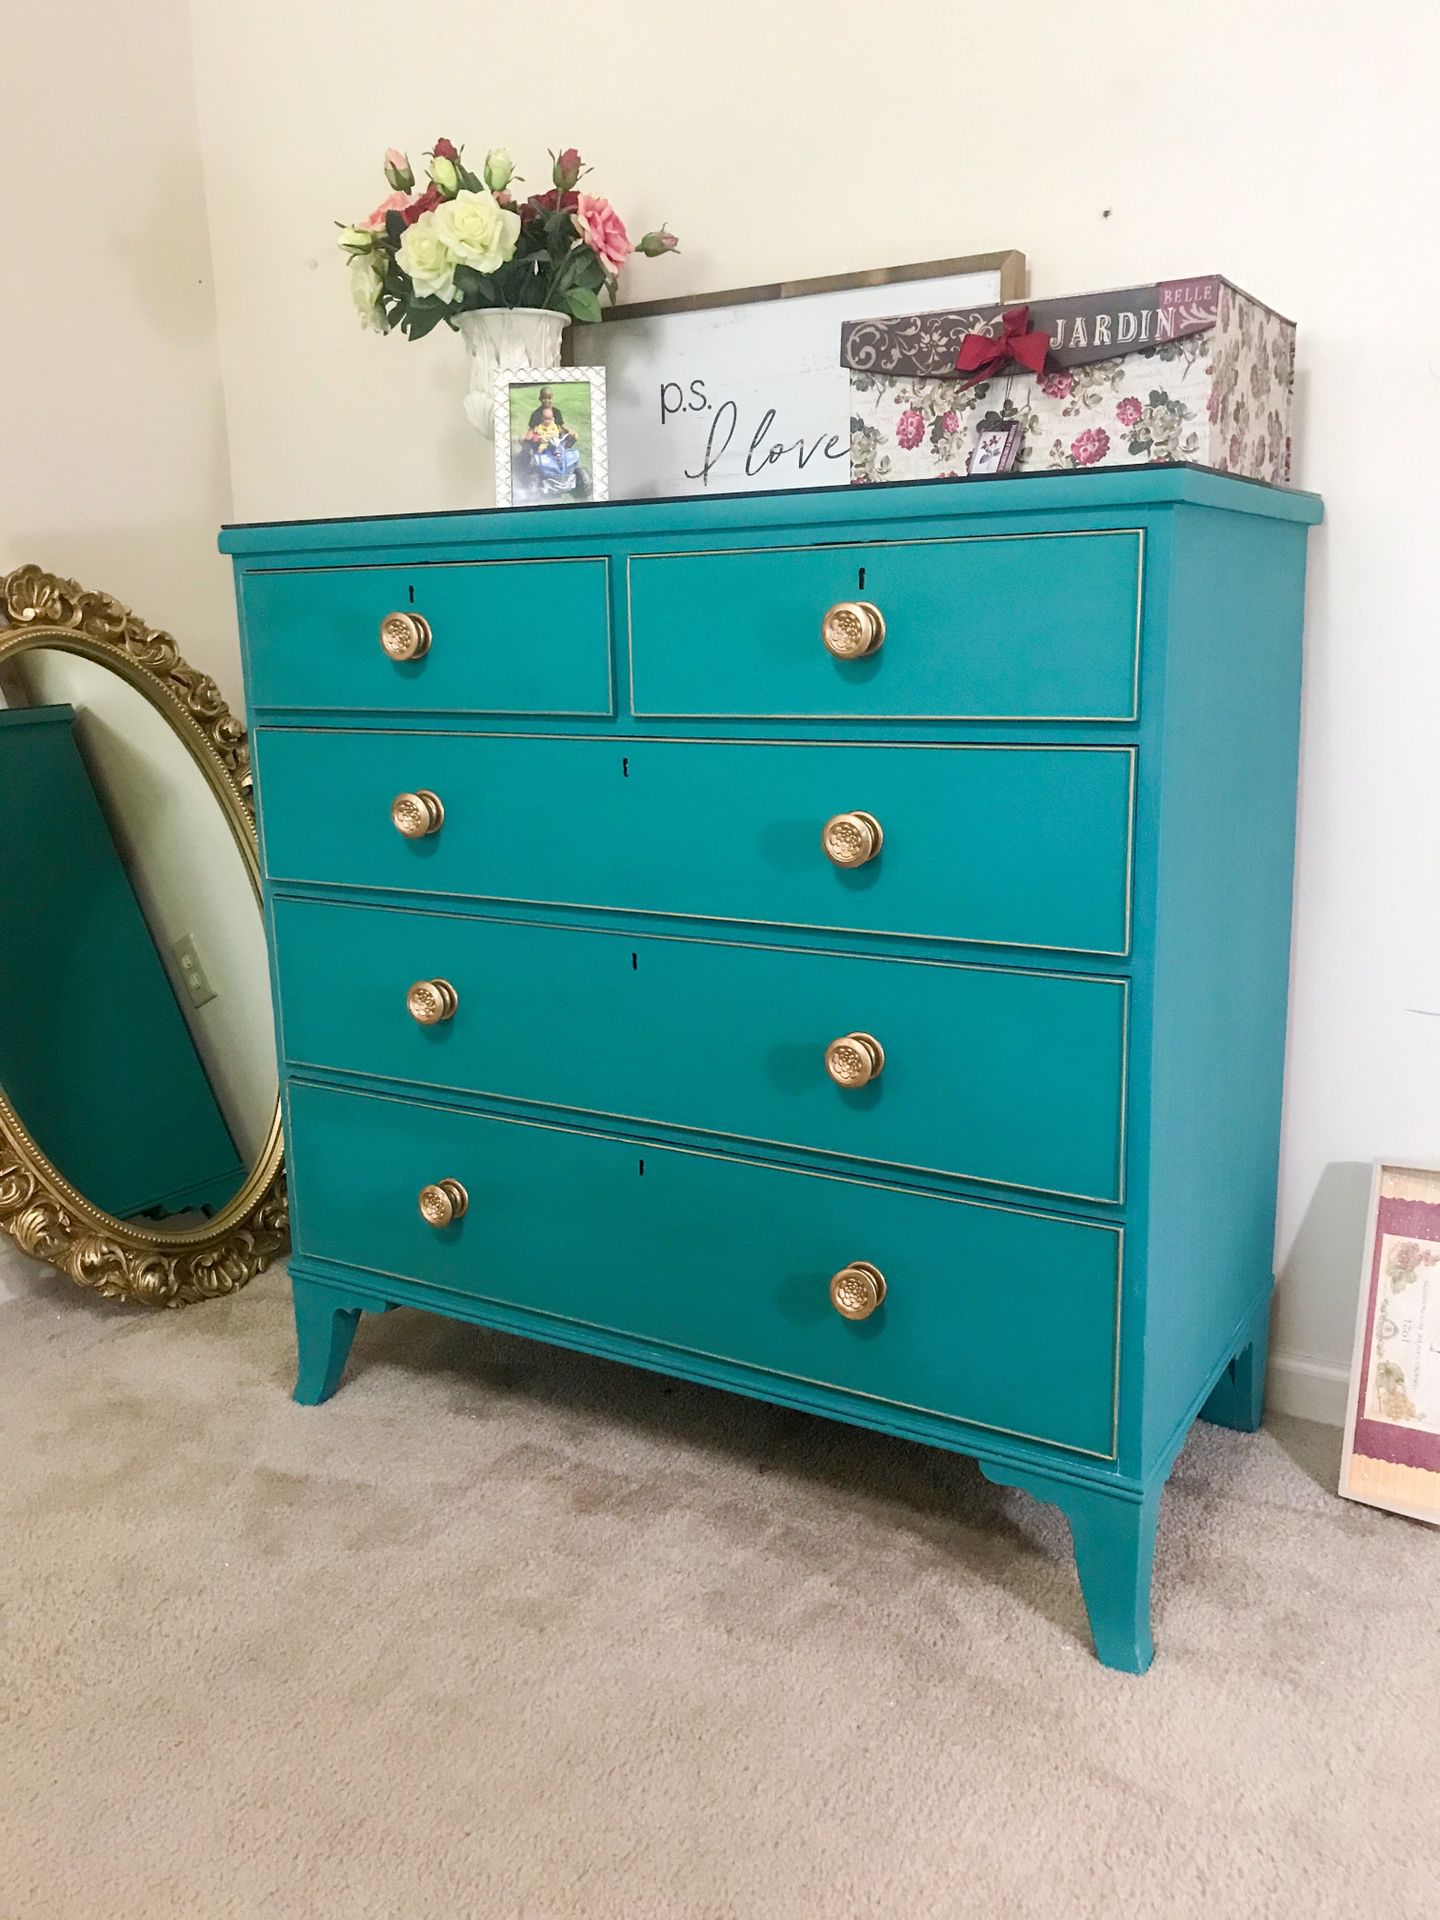 Real wood accent dresser with glass on top